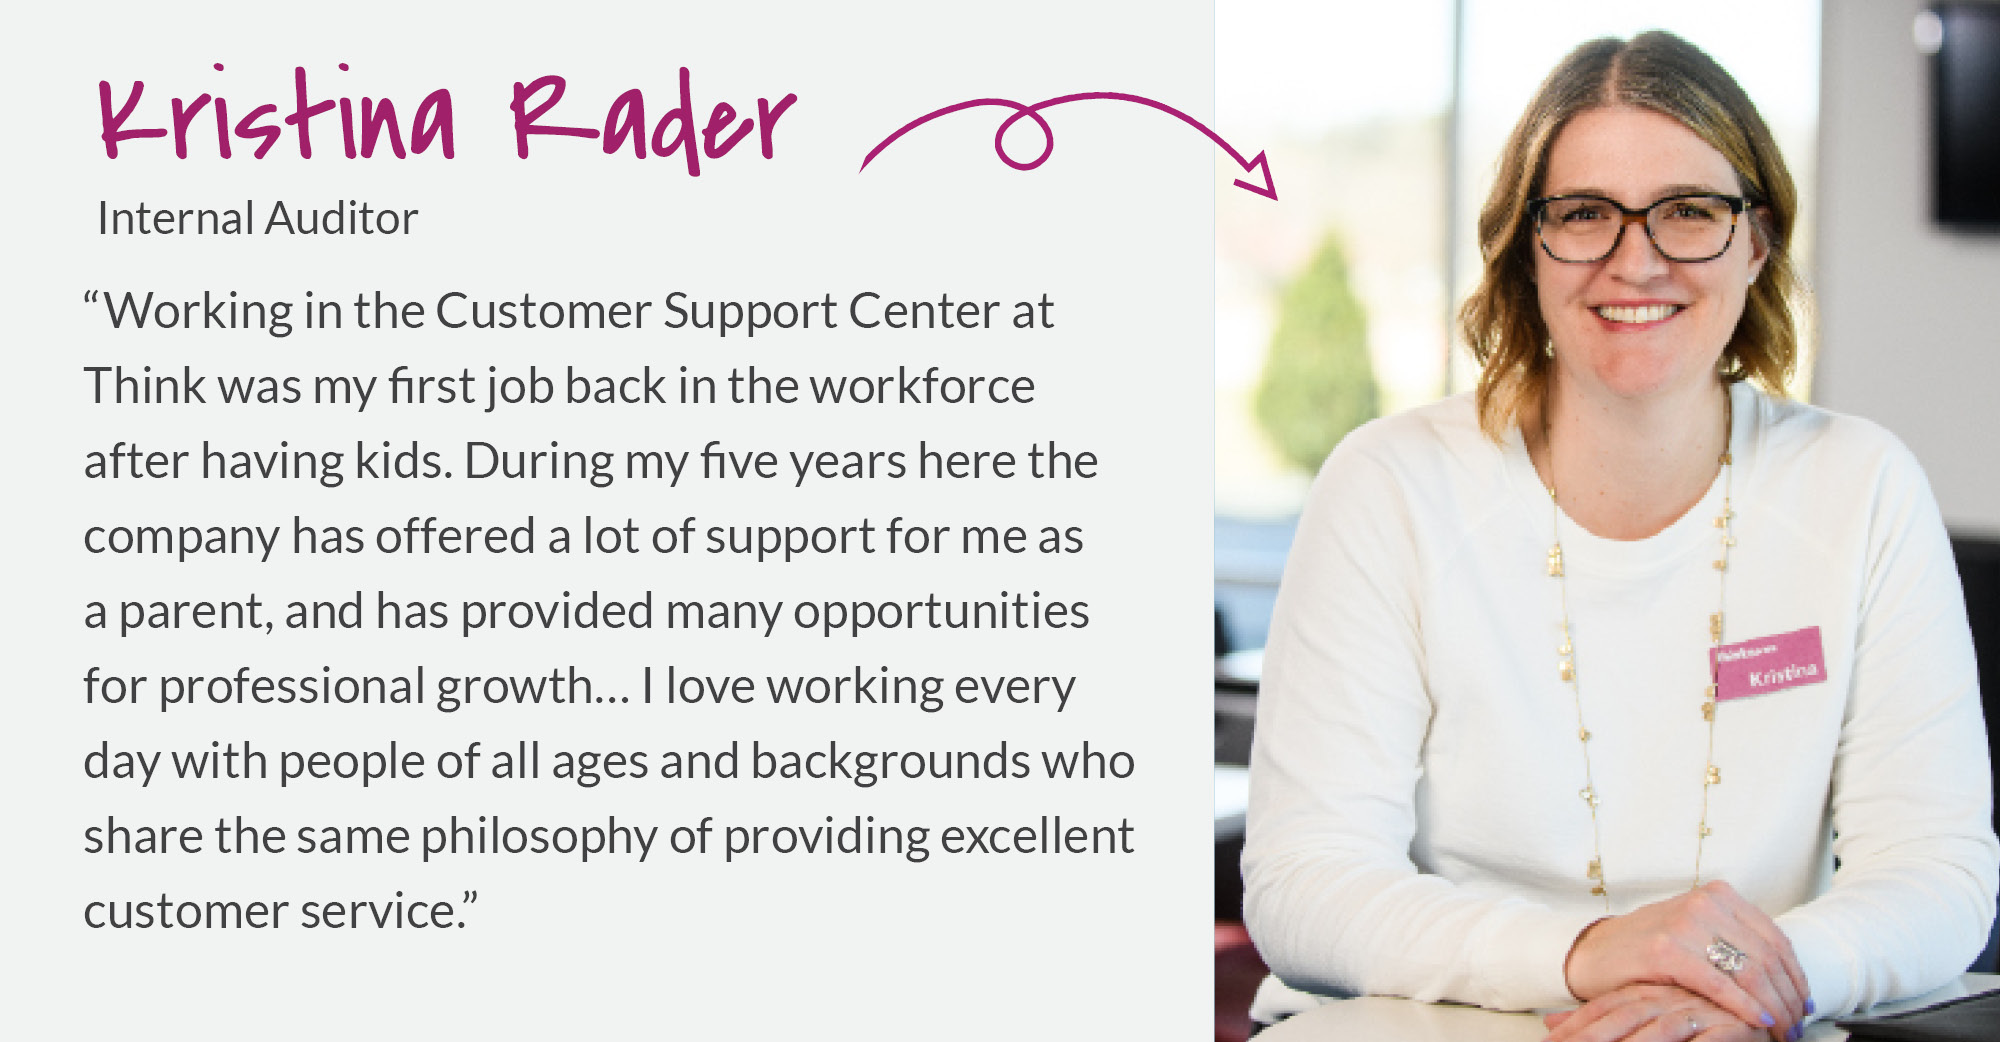 Kristina Rader - Working in the Customer Support Center at Think was my first job back in the workforce after having kids.